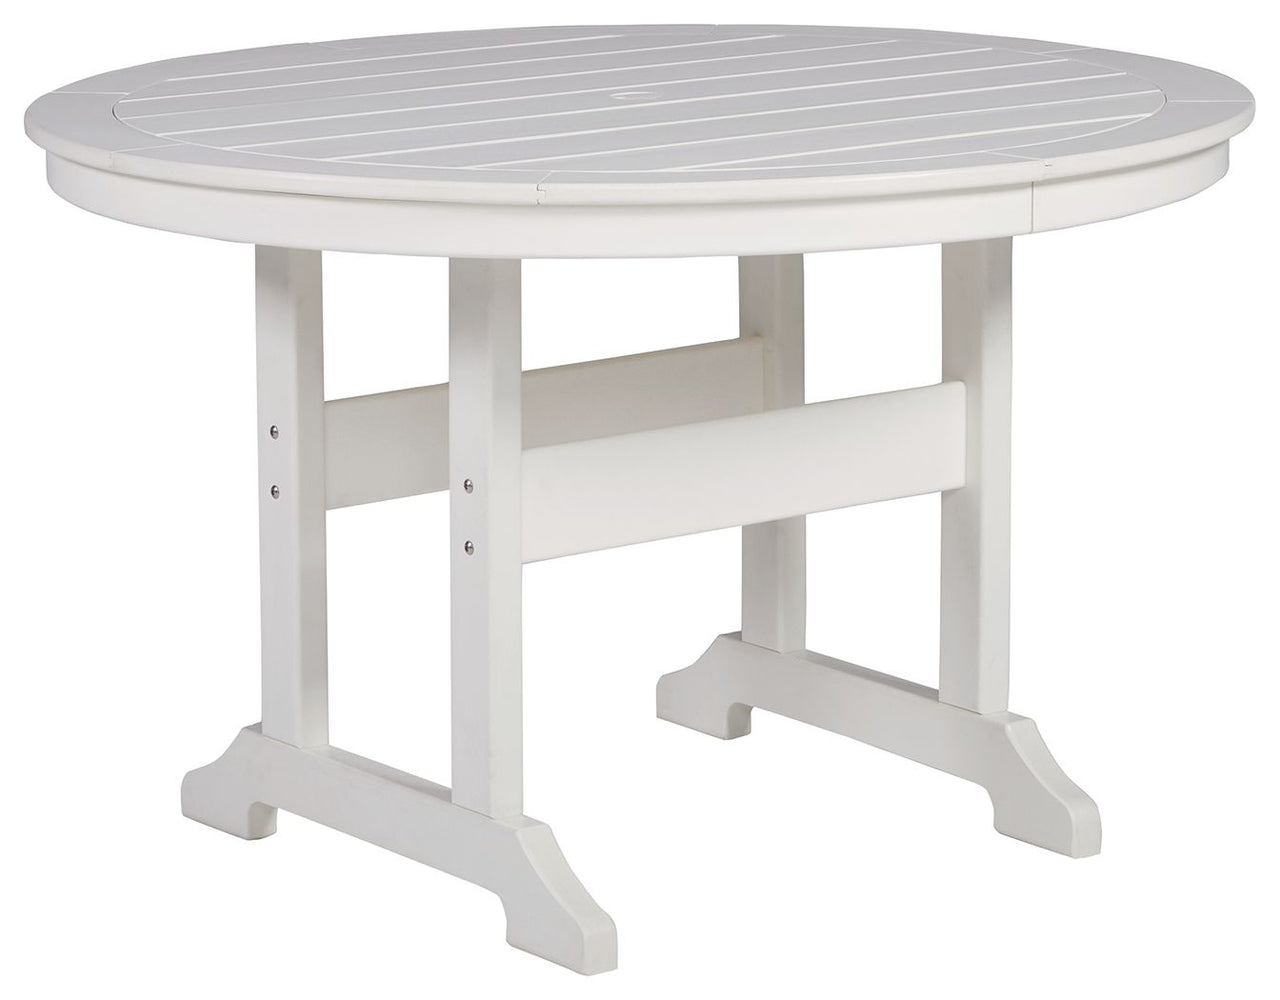 Crescent Luxe - White - Round Dining Table W/Umb Opt Tony's Home Furnishings Furniture. Beds. Dressers. Sofas.